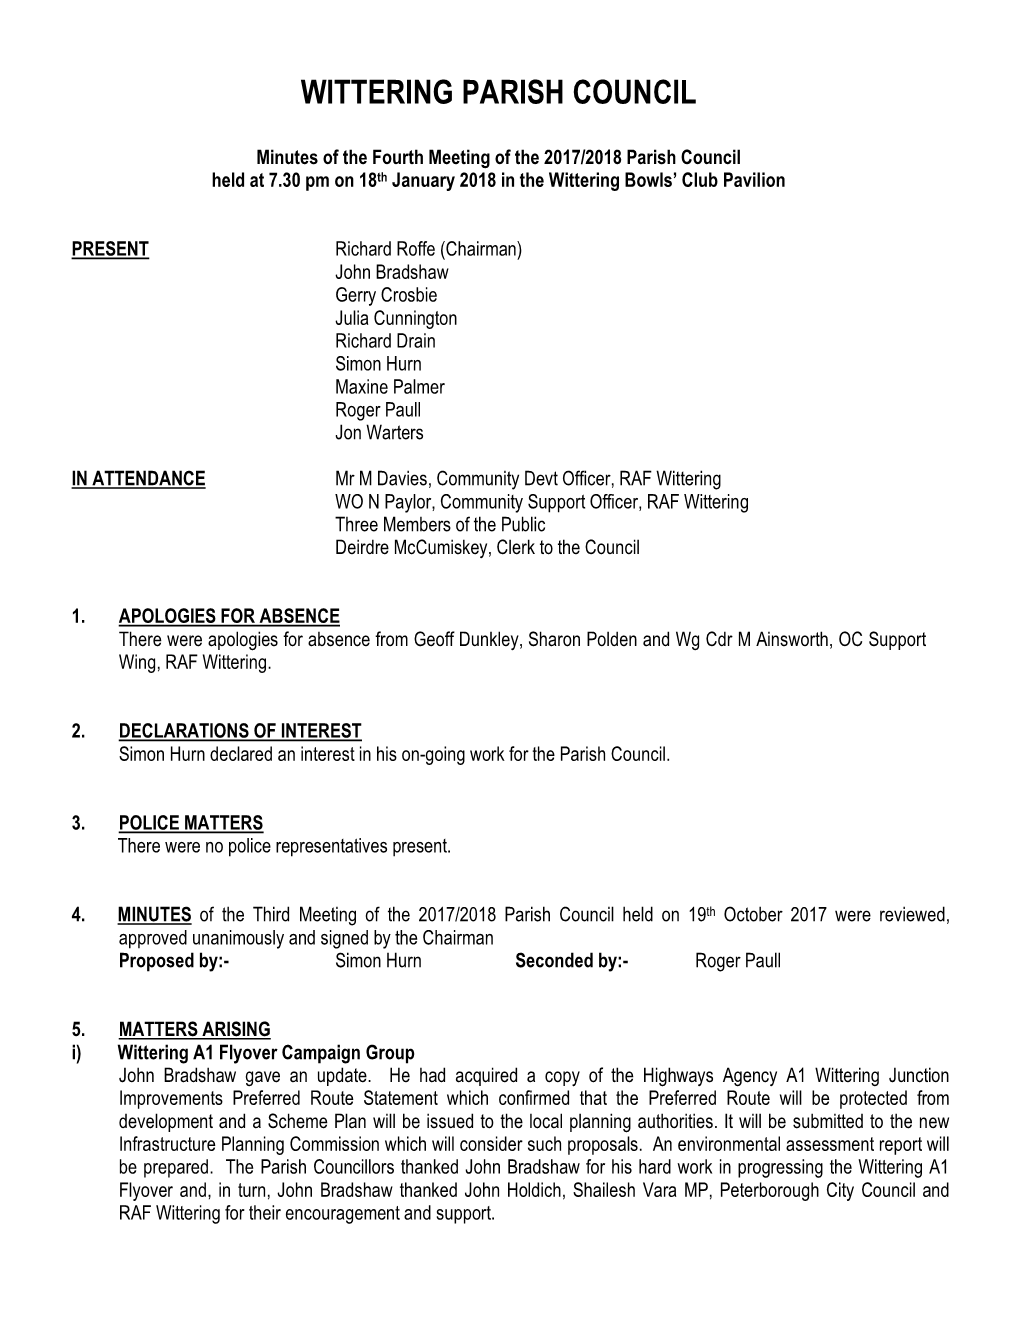 Minutes of the Fourth Meeting of the 2017/2018 Parish Council Held at 7.30 Pm on 18Th January 2018 in the Wittering Bowls’ Club Pavilion